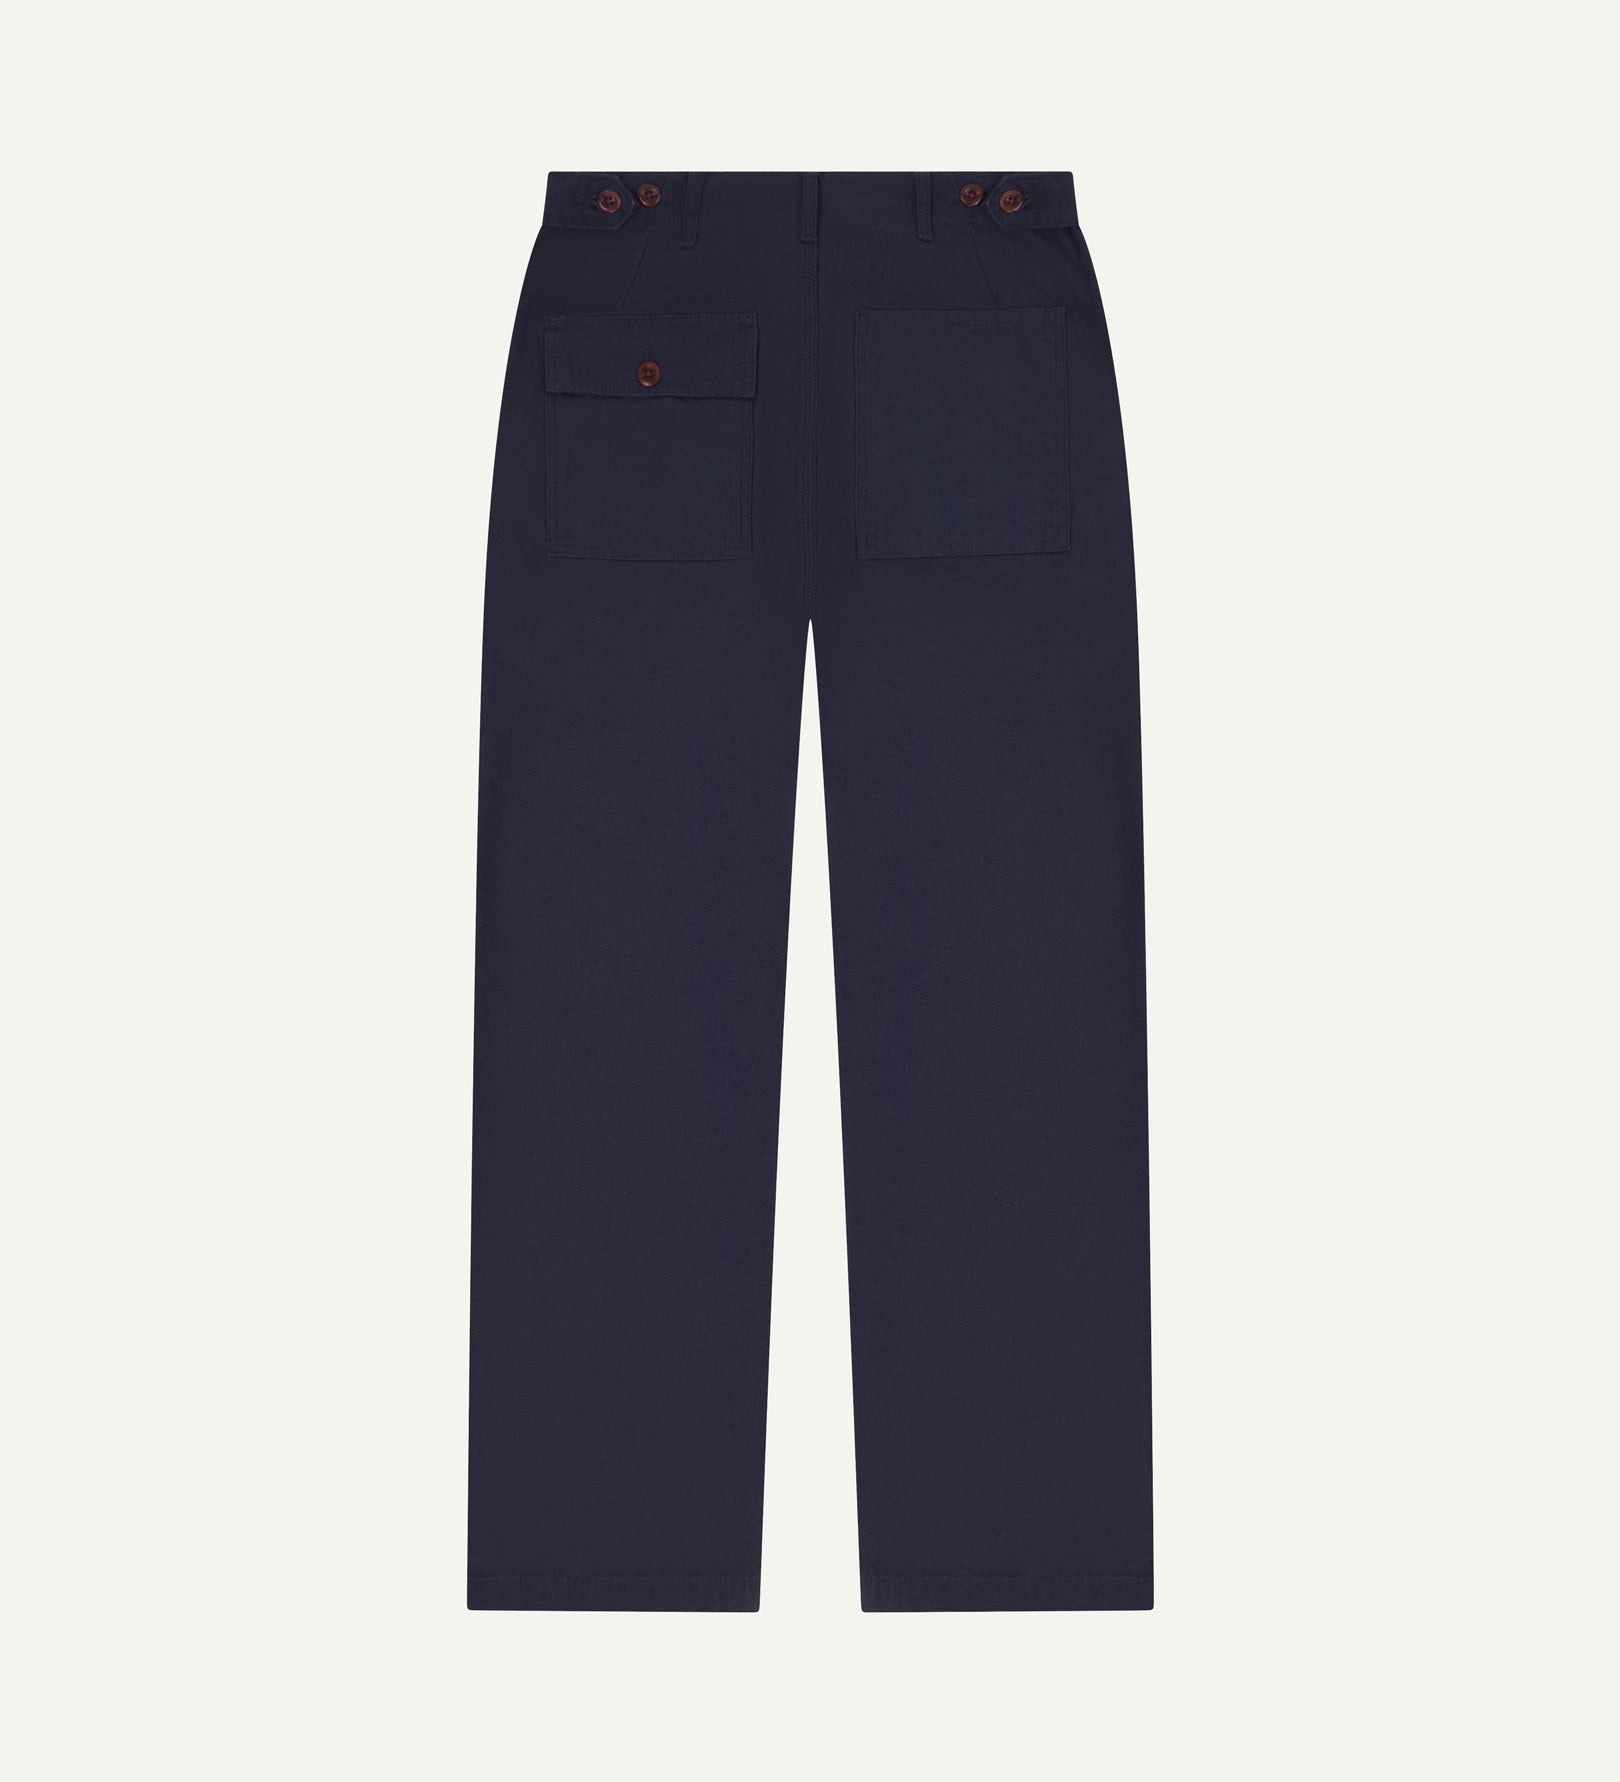 Full length back-view of midnight blue cotton 5005 trousers with view of rear pockets, belt loops and tapered leg fit.